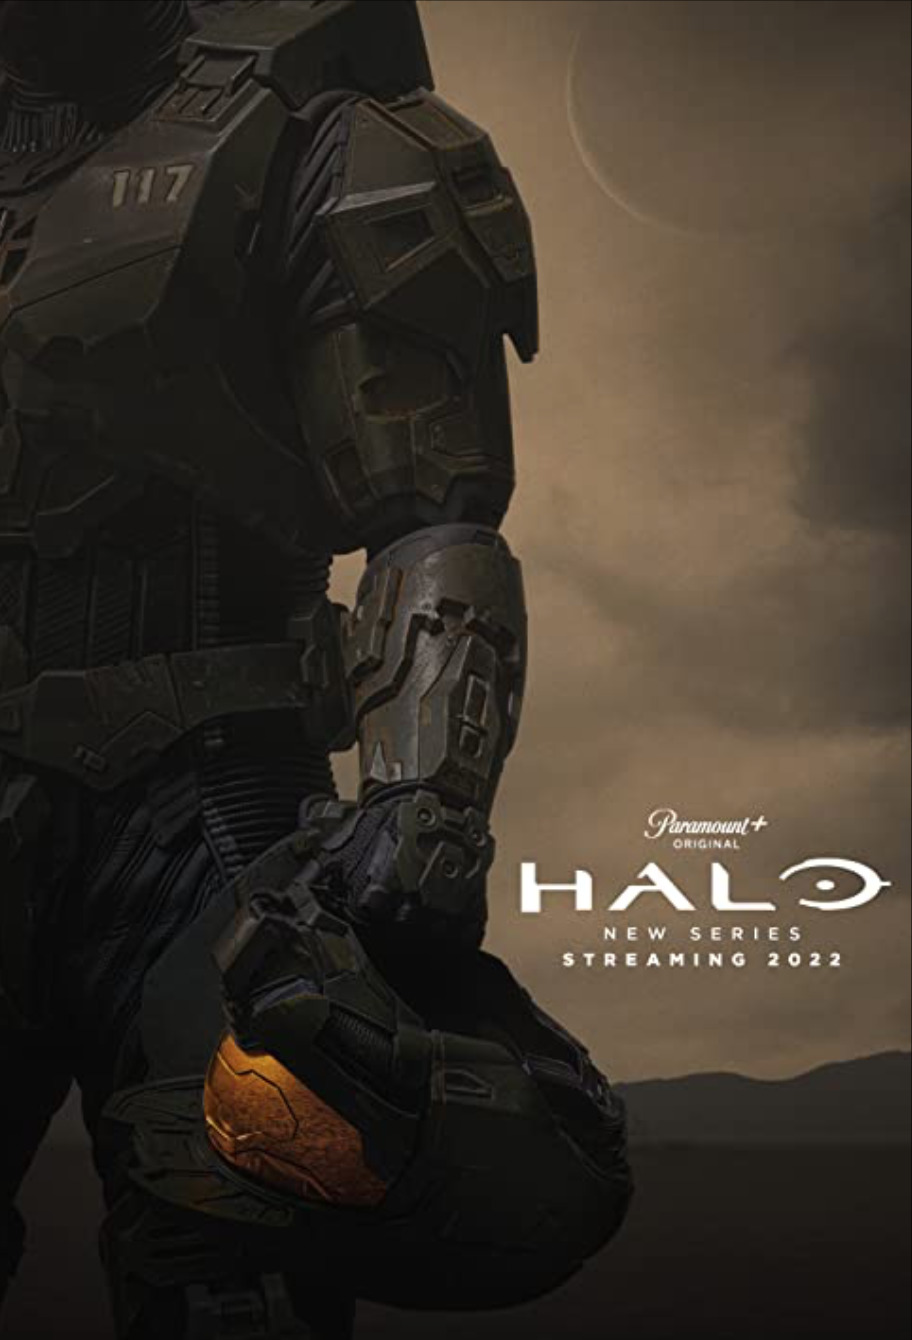 Halo cast – who's in the sci-fi series?